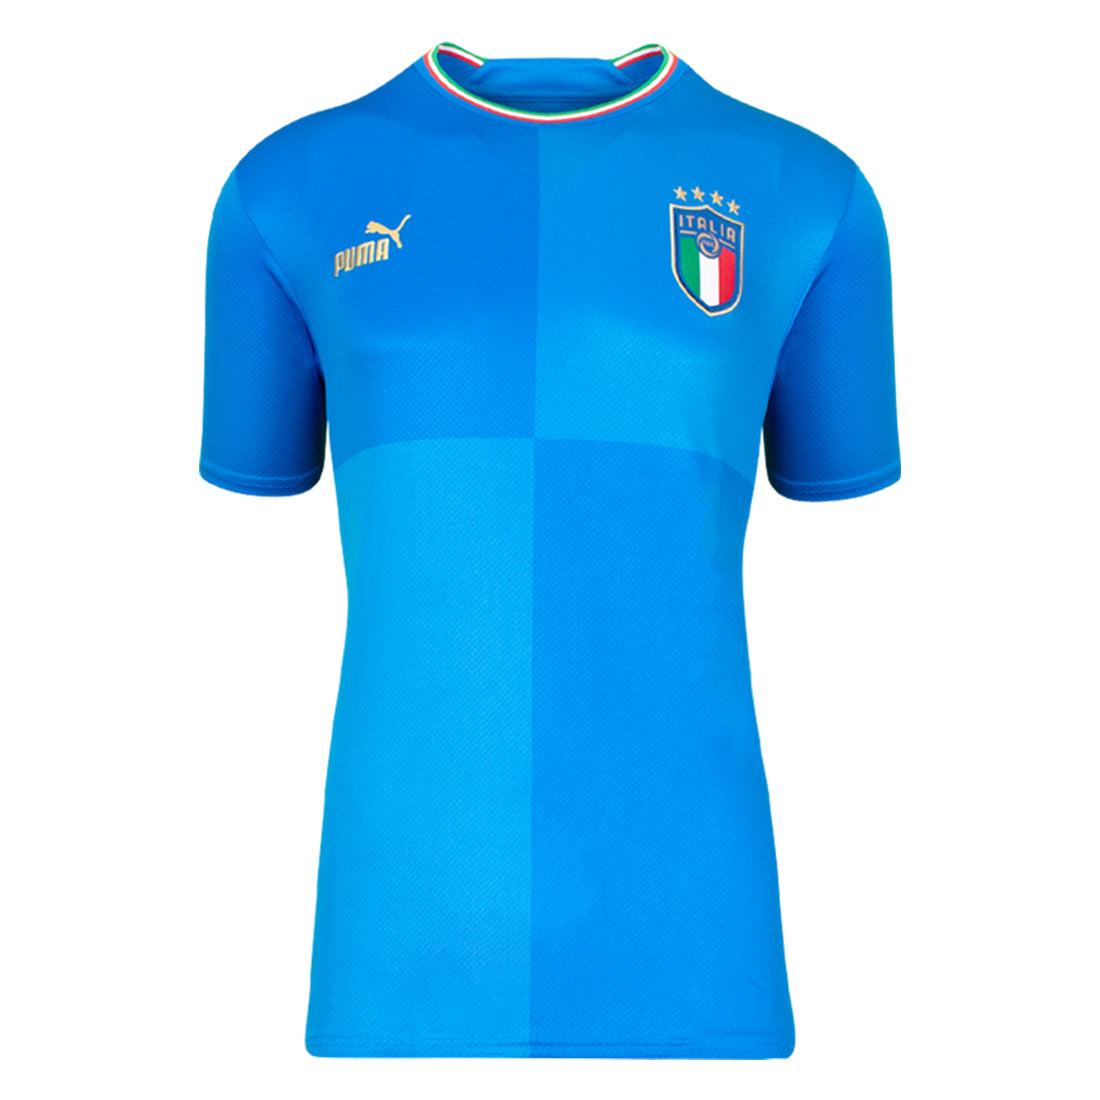 ALESSANDRO DEL PIERO – AUTHENTIC SIGNED MODERN ITALY HOME JERSEY (IN STOCK OCT 1)